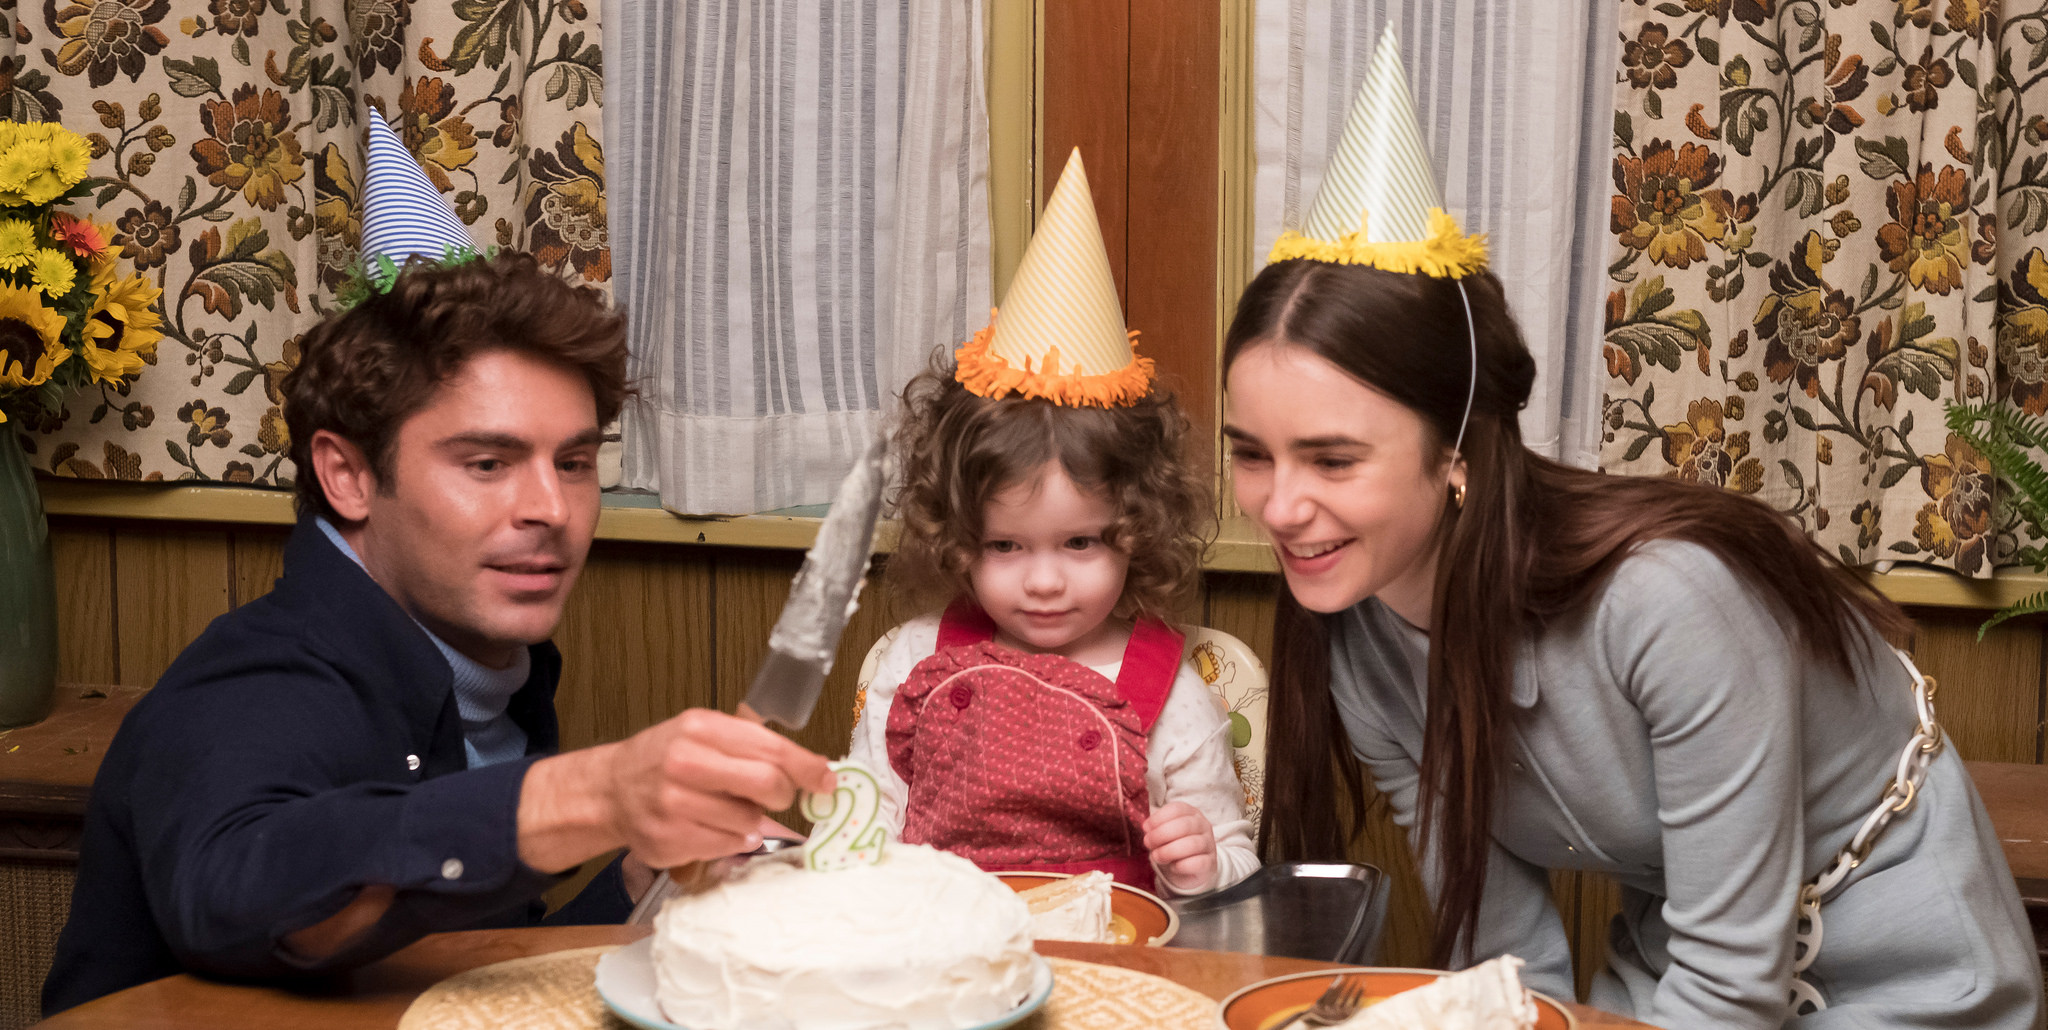 Zac Efron and Lily Collins star in Extremely Wicked, Shockingly Evil, and Vile, about the serial killer Ted Bundy.